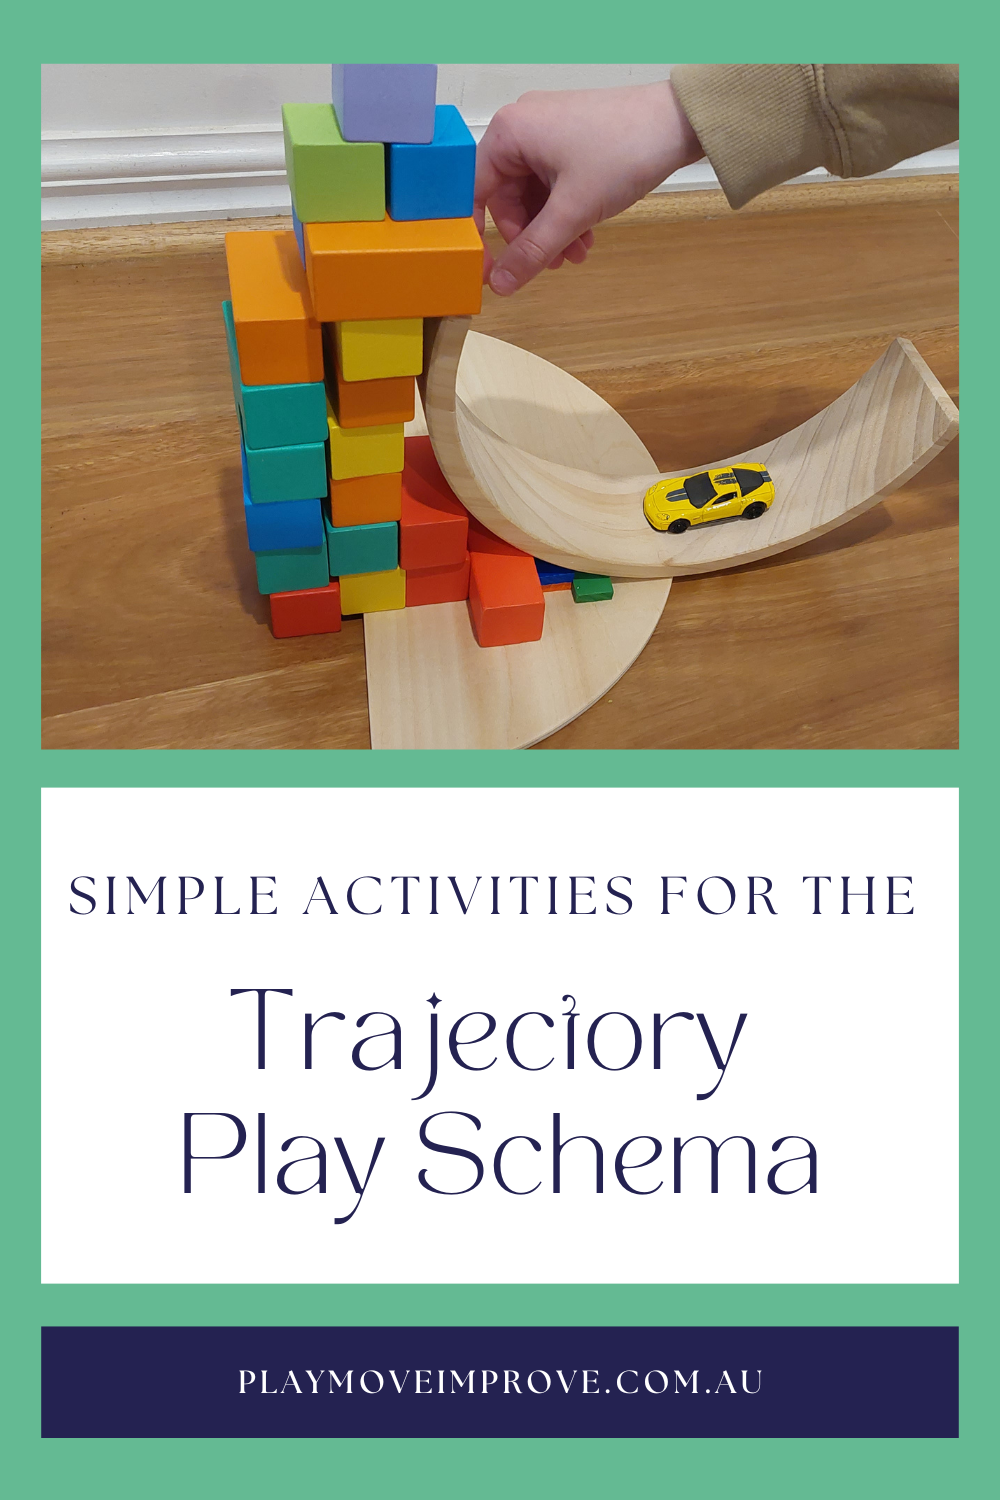 What are play schemas and how do they help your toddler learn?